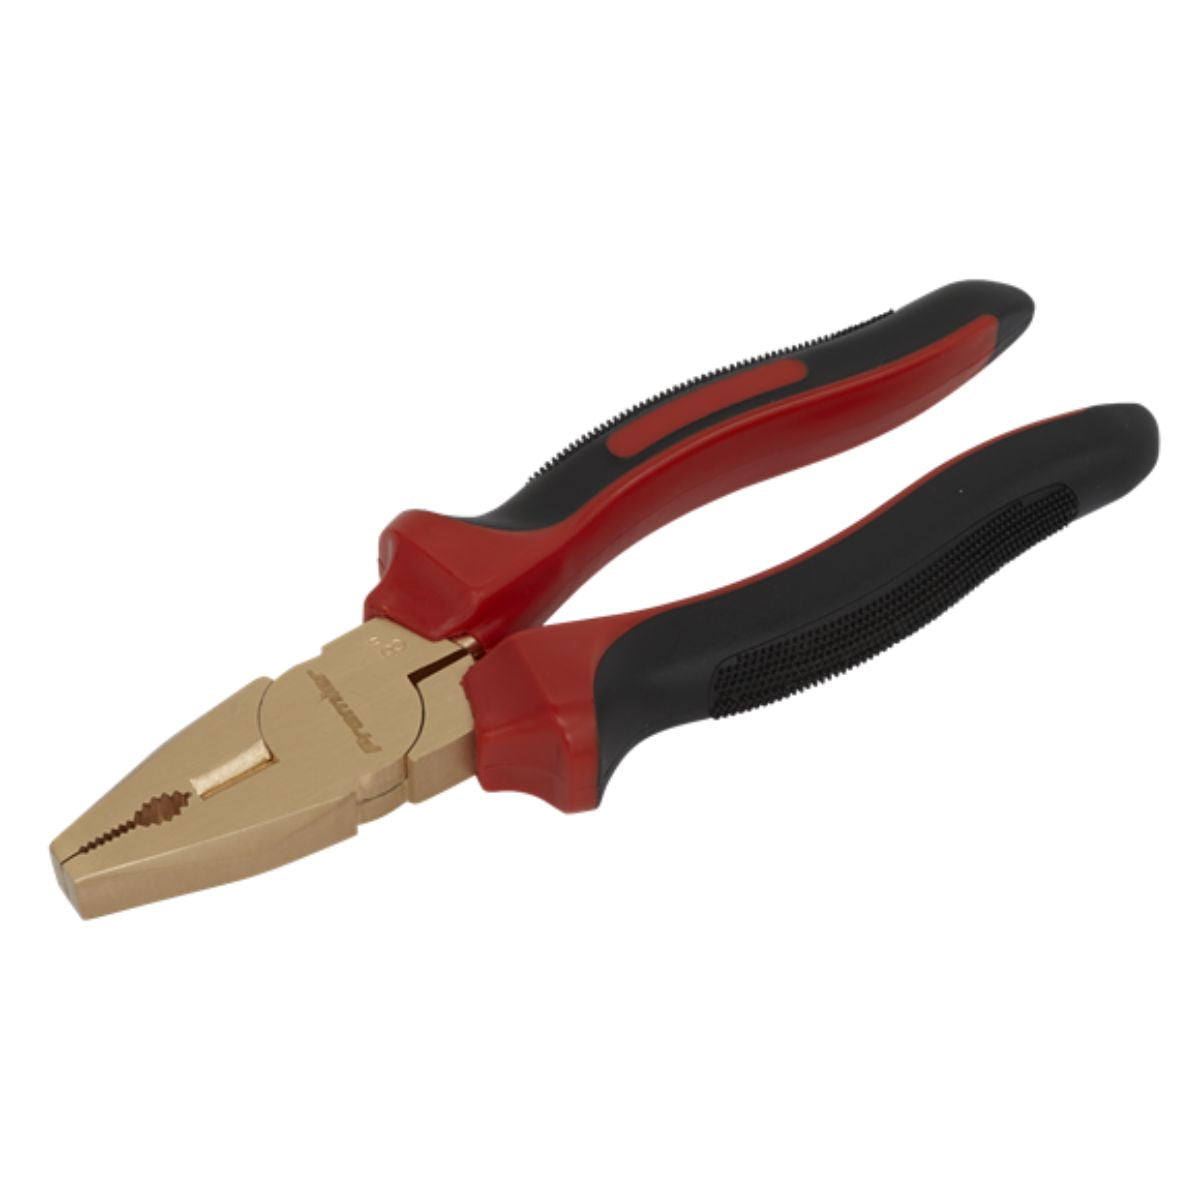 Sealey NS072 200mm Combination Pliers Non-Sparking